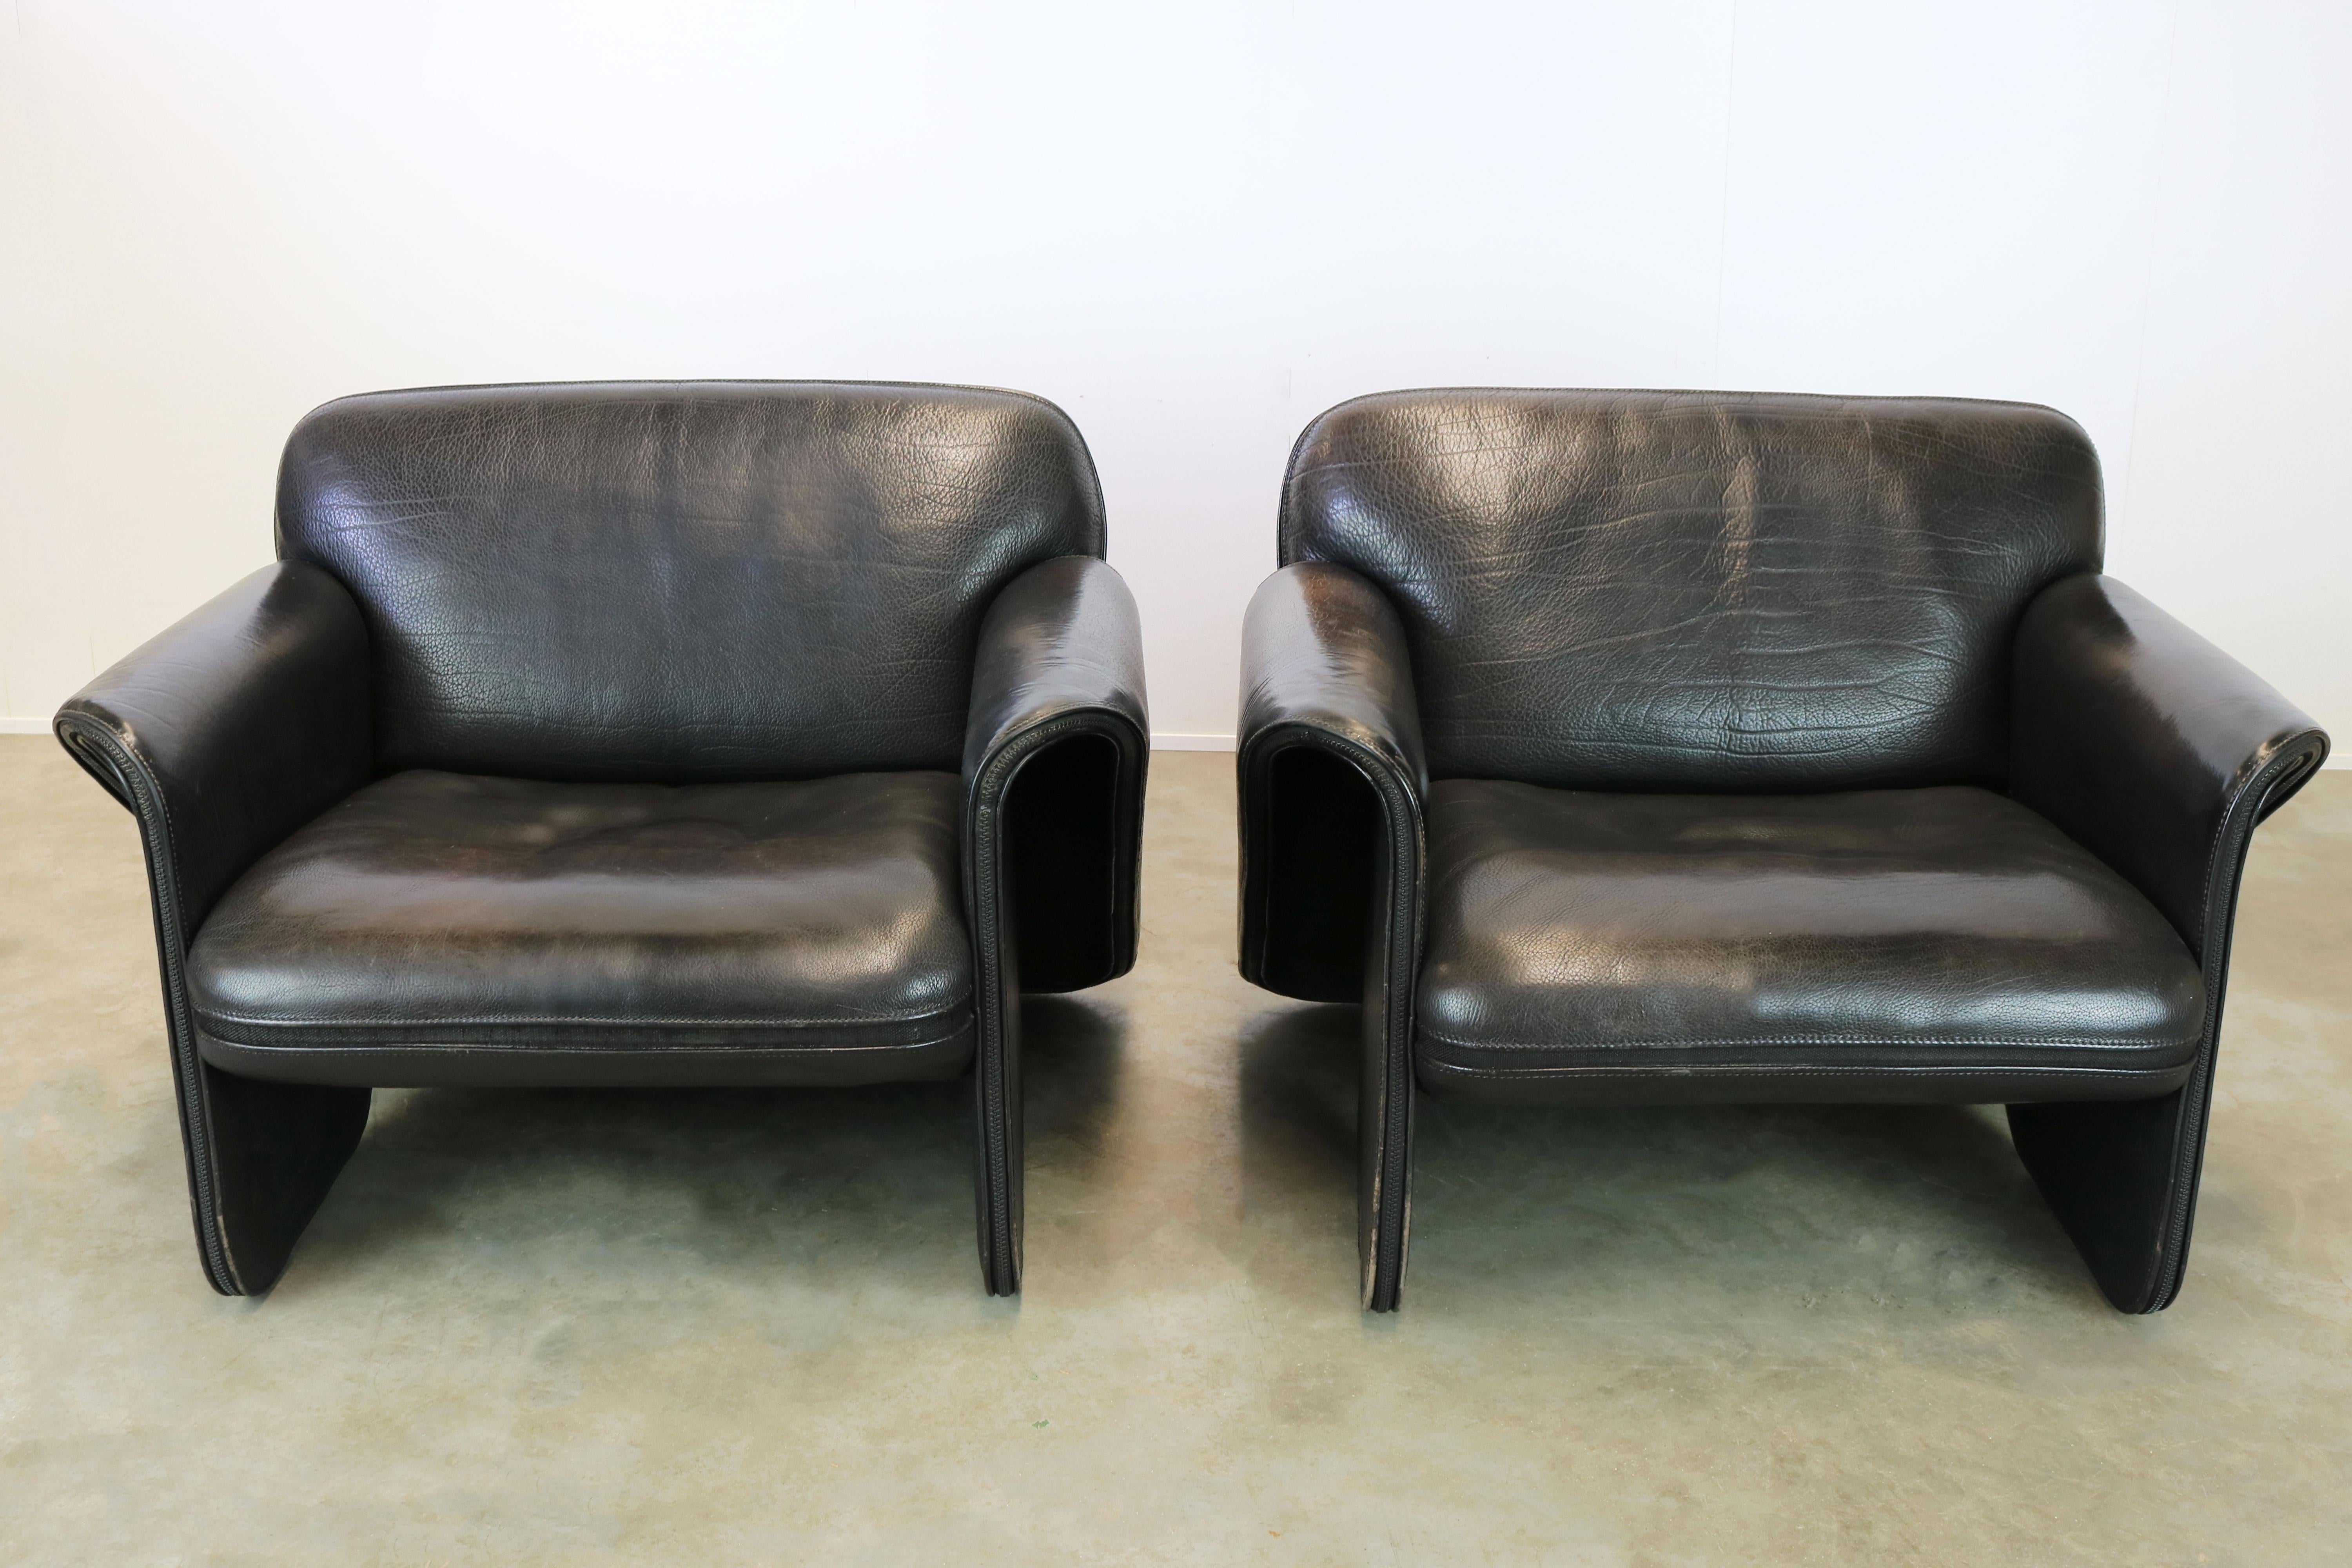 Rare Pair of Swiss De Sede Ds 125 Lounge Chairs by Gerd Lange 1978 Black Leather 2